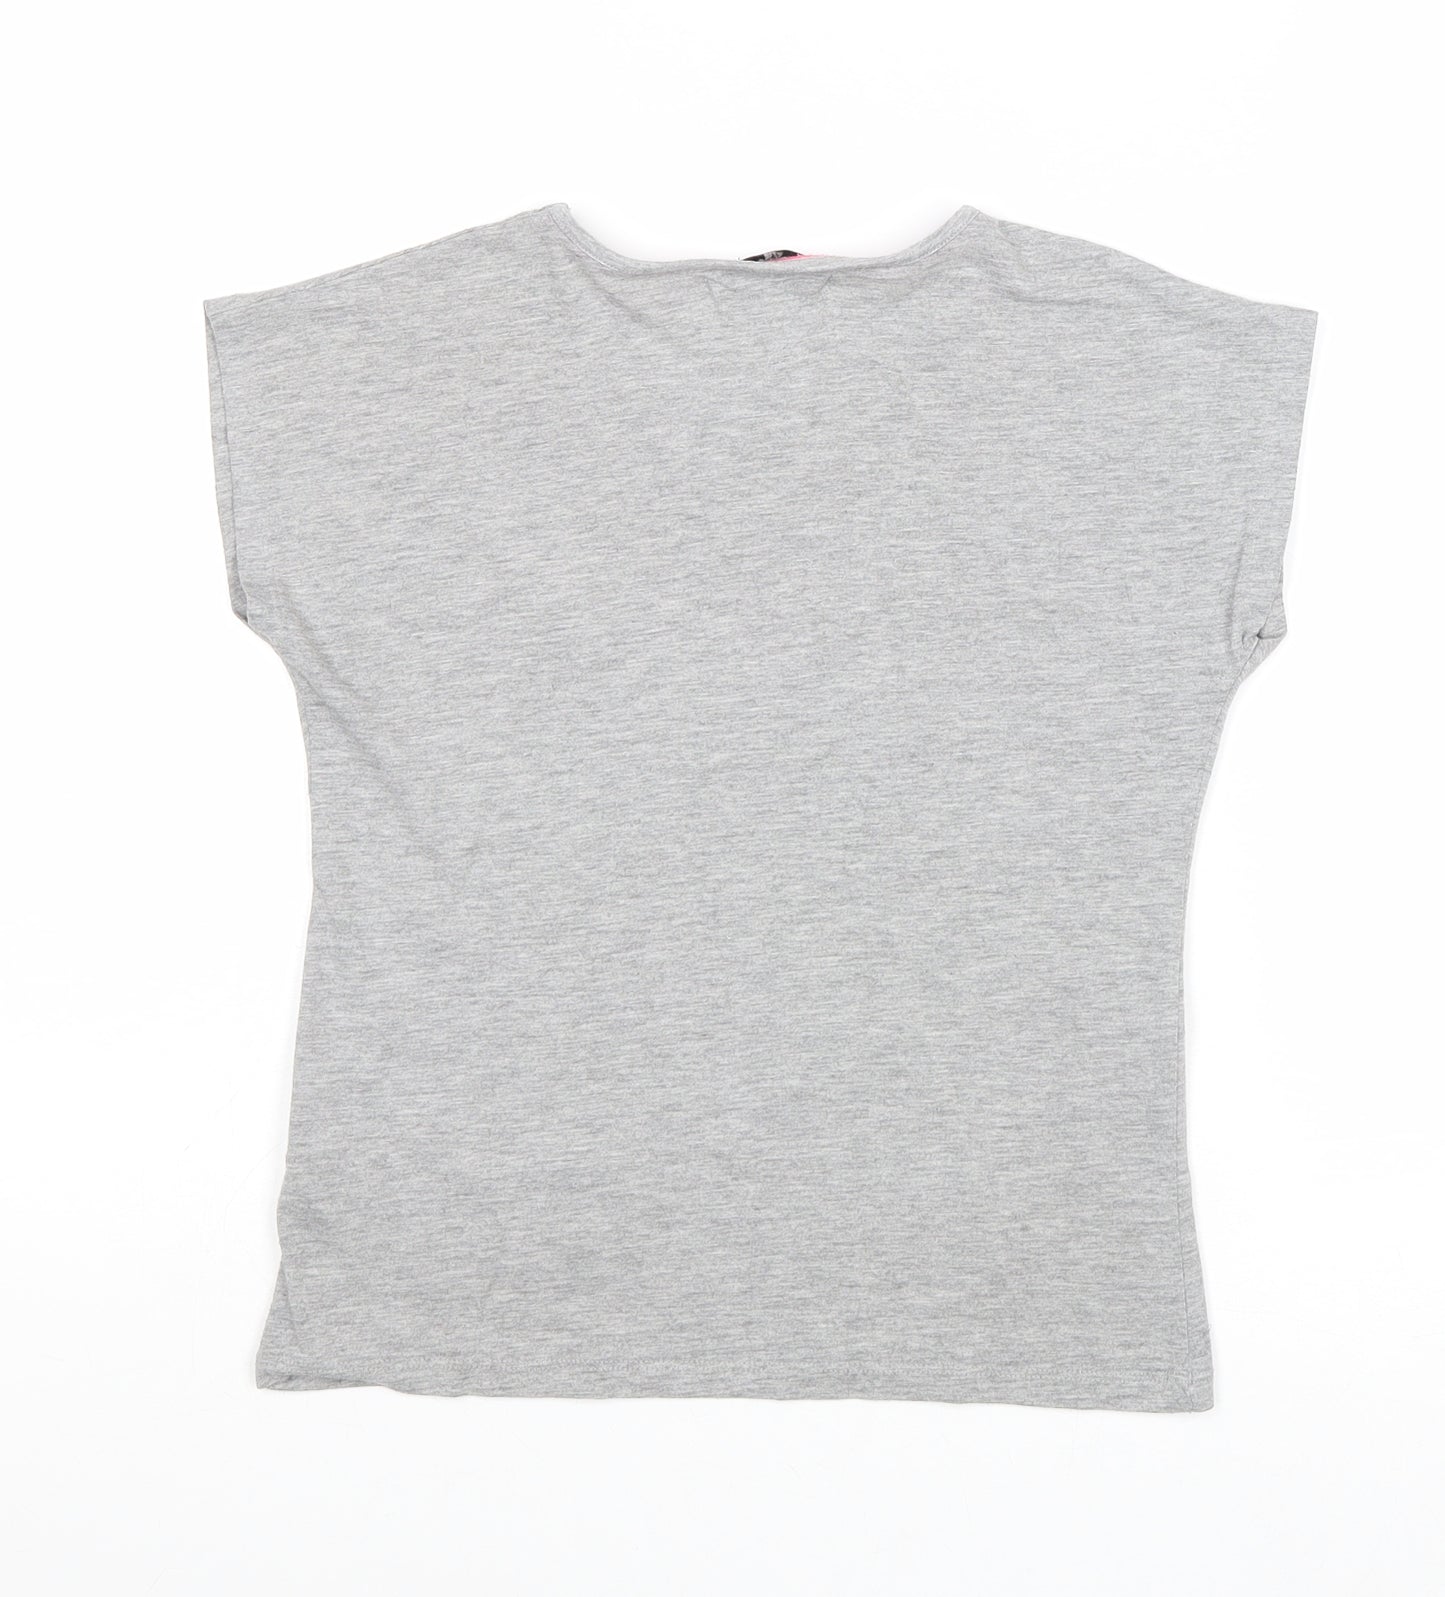 Marks and Spencer Girls Grey Cotton Basic T-Shirt Size 8-9 Years Round Neck Pullover - Hello!